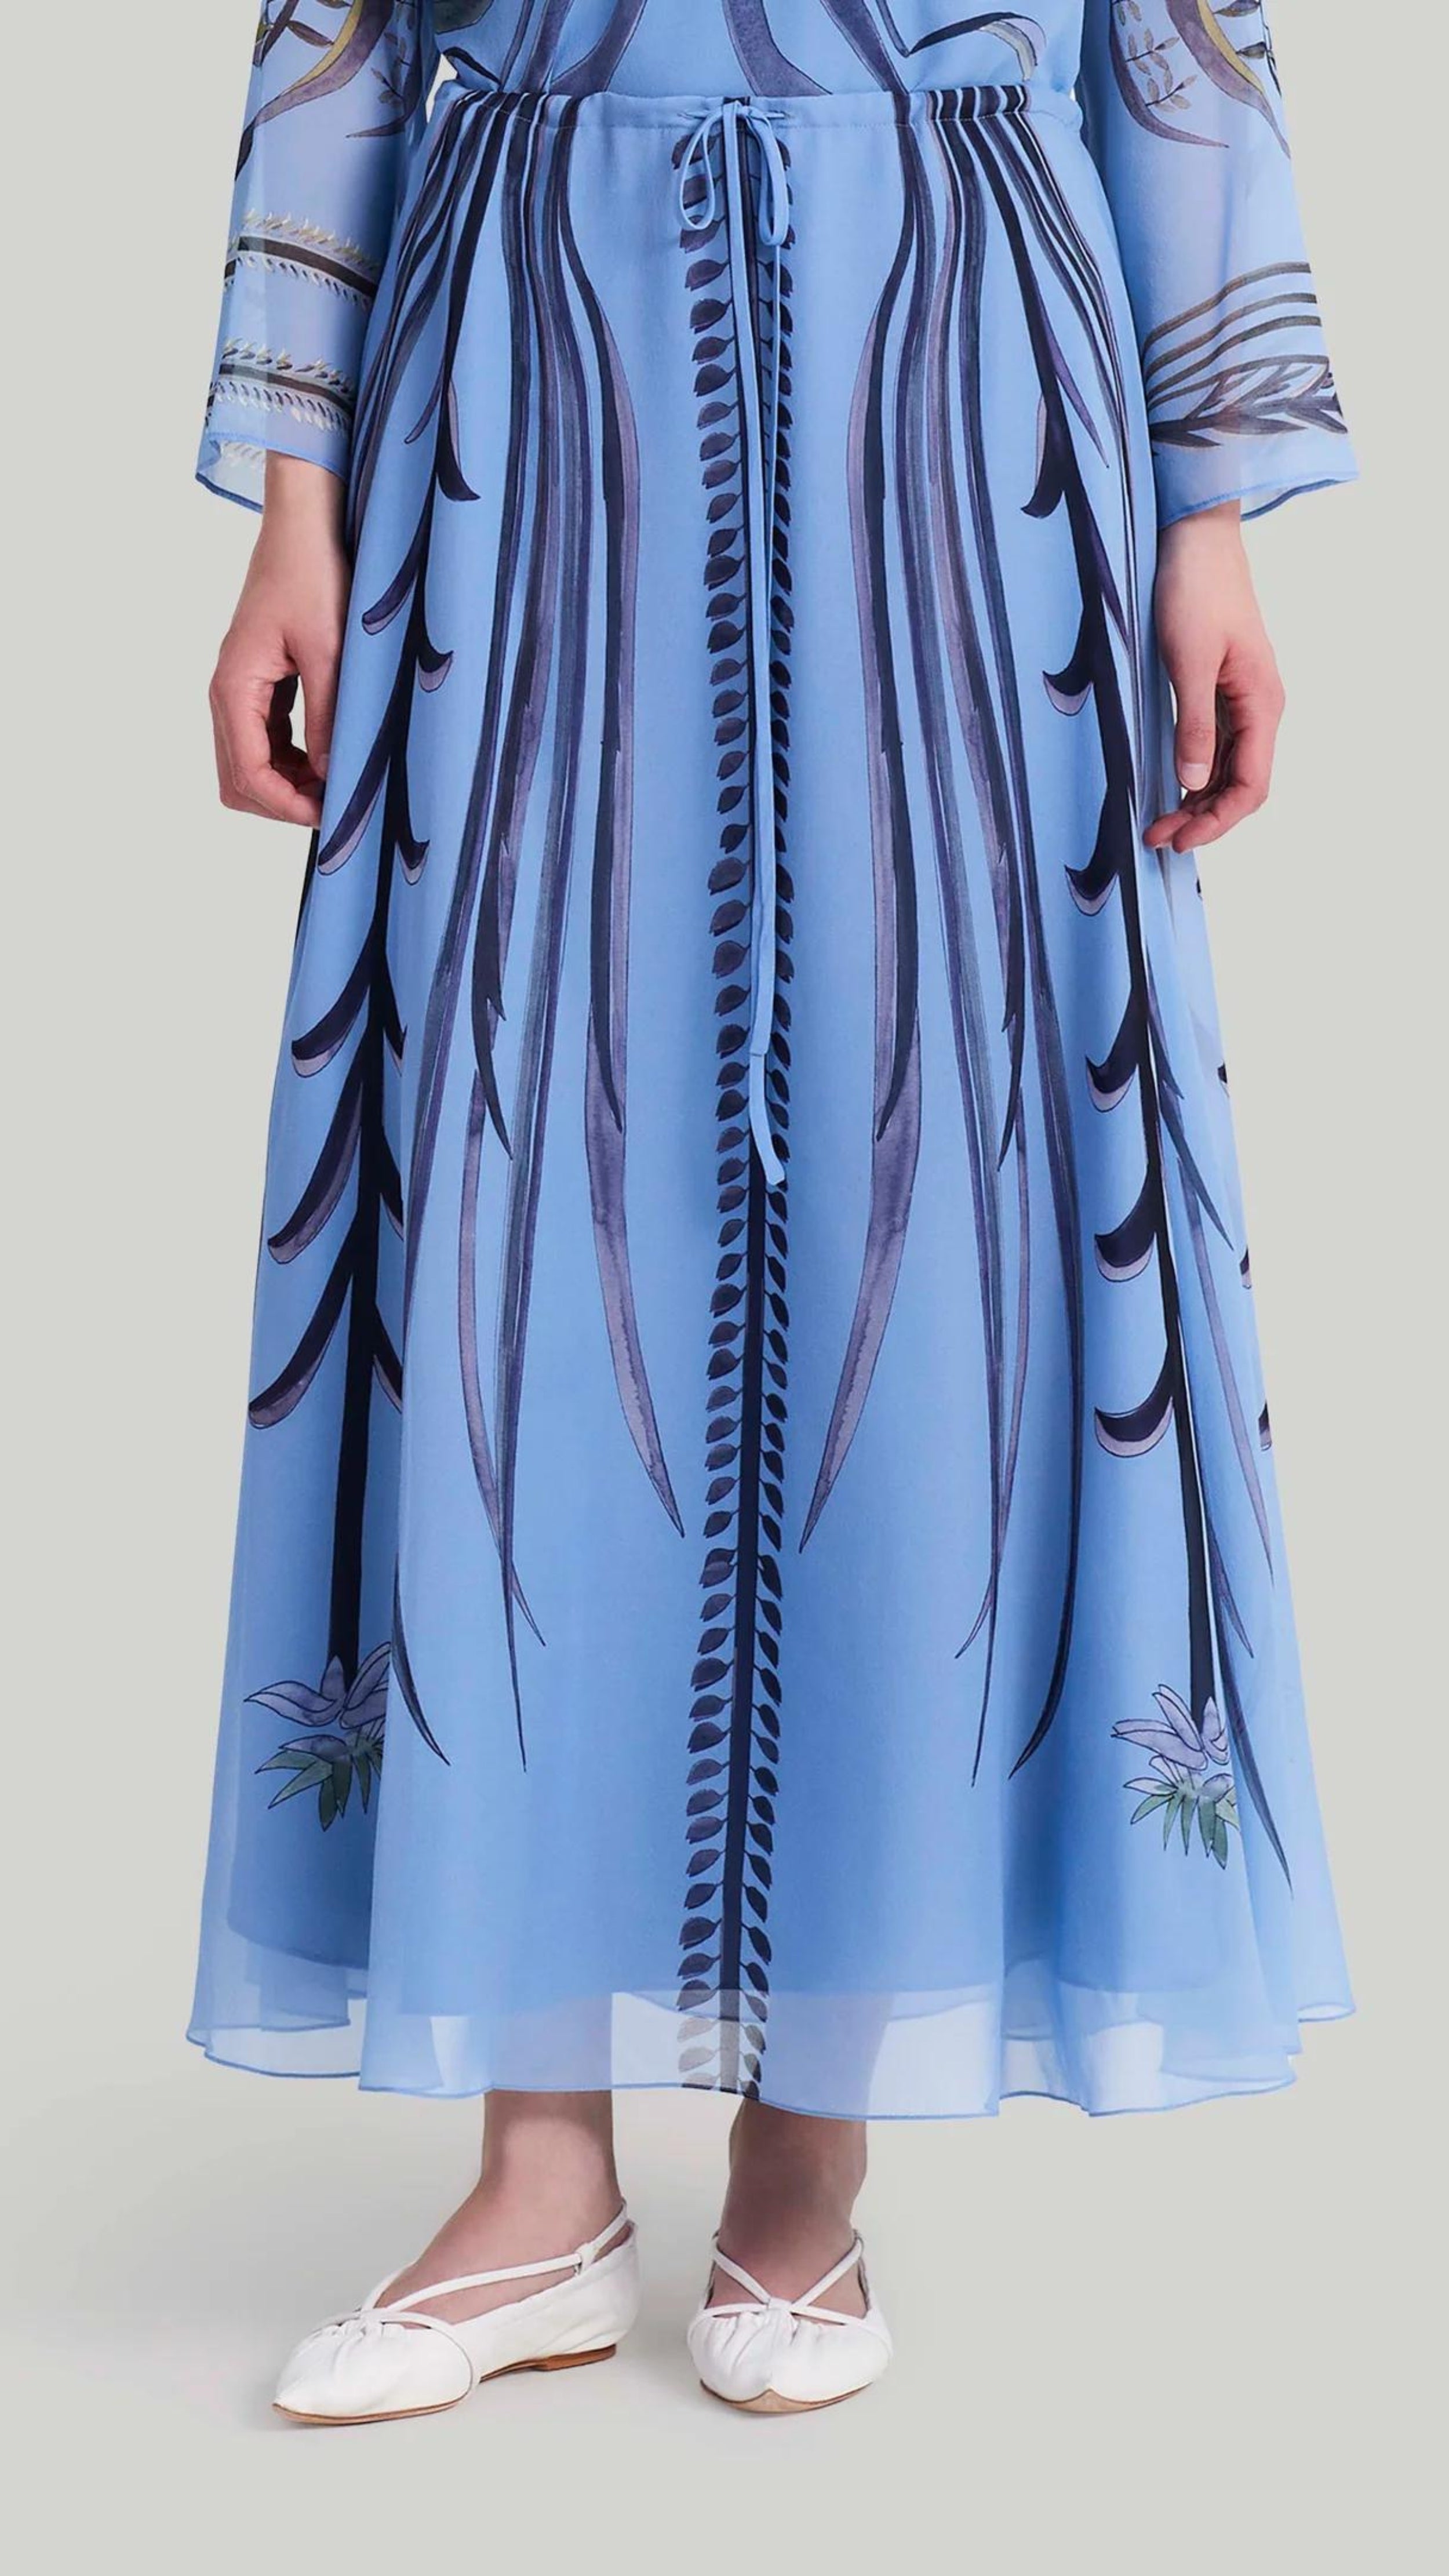 Altuzarra Roxana Skirt. Sky blue, navy blue and violet highlight. Hand painted skirt with adjustable tied at the waist. Midi length. Natural pattern. Shown on model facing front